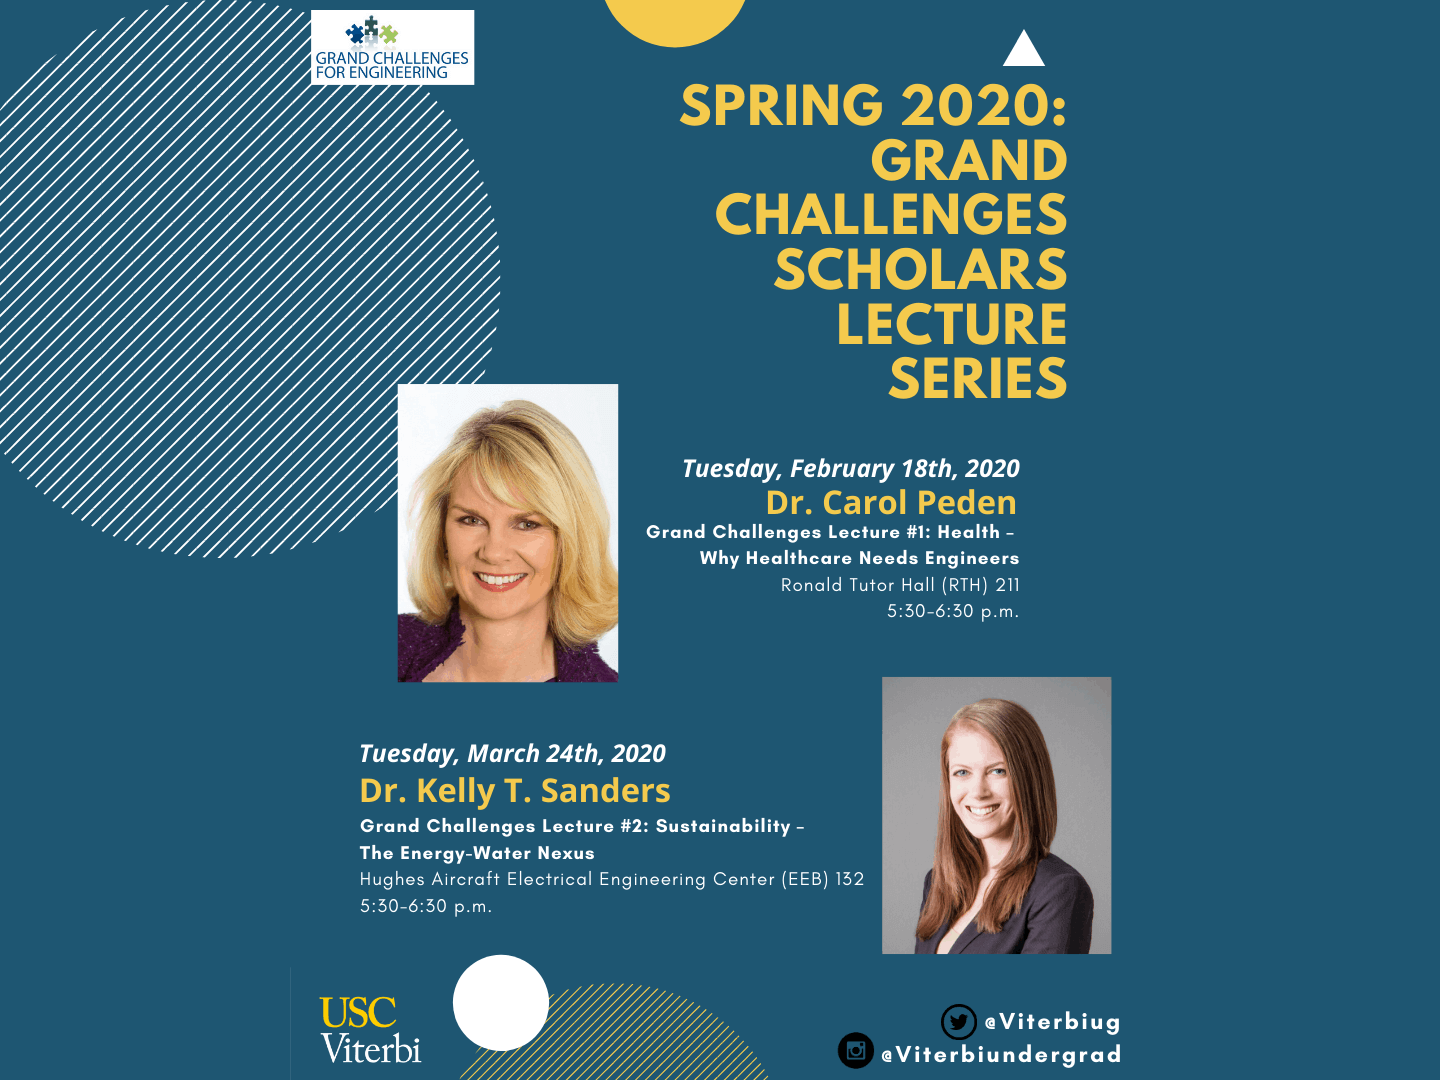 Featured image for “Spring 2020: Grand Challenges Scholars Lecture Series”